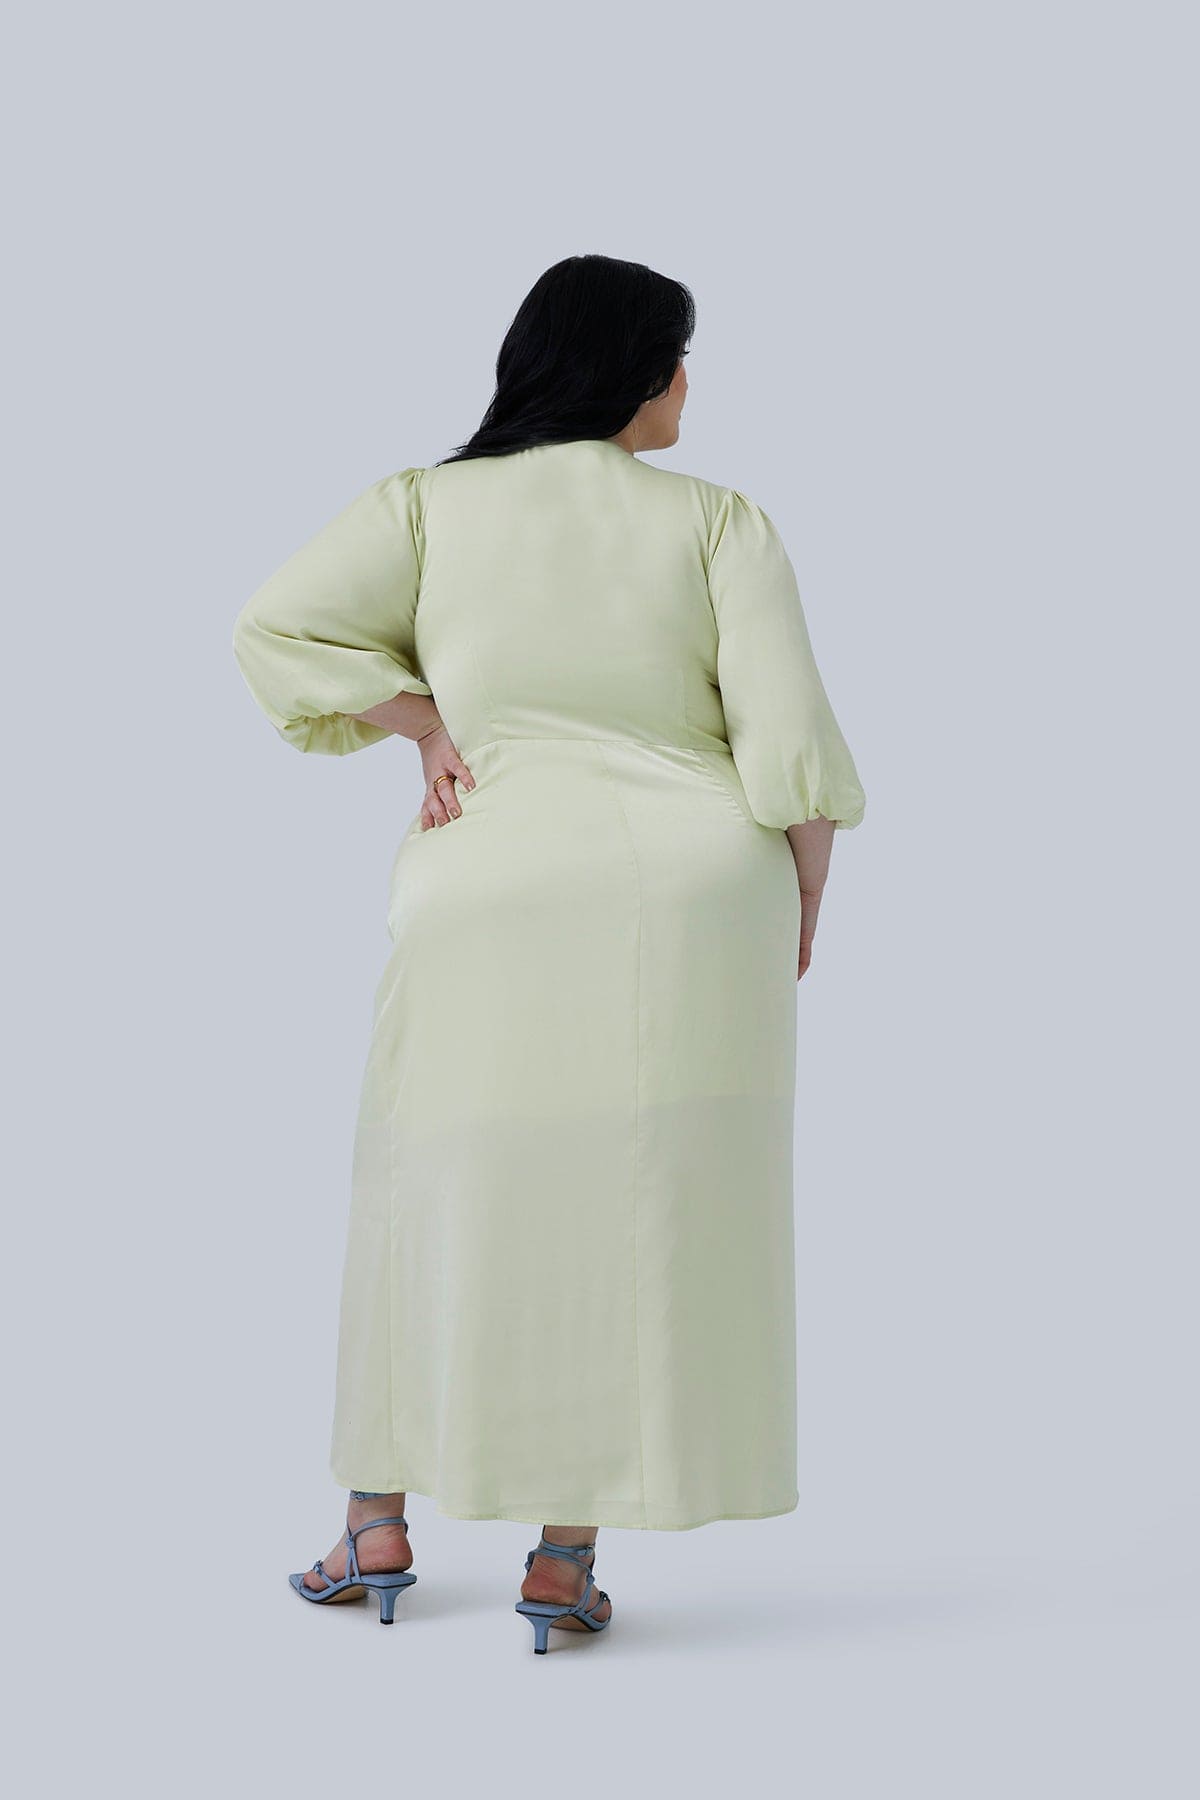 Back view of the Allie Maxi Dress for plus size women. Designed by Gia IRL. Model has hand on hips, dress has bubble sleeves and fabric is silky smooth hugging your curves perfectly.